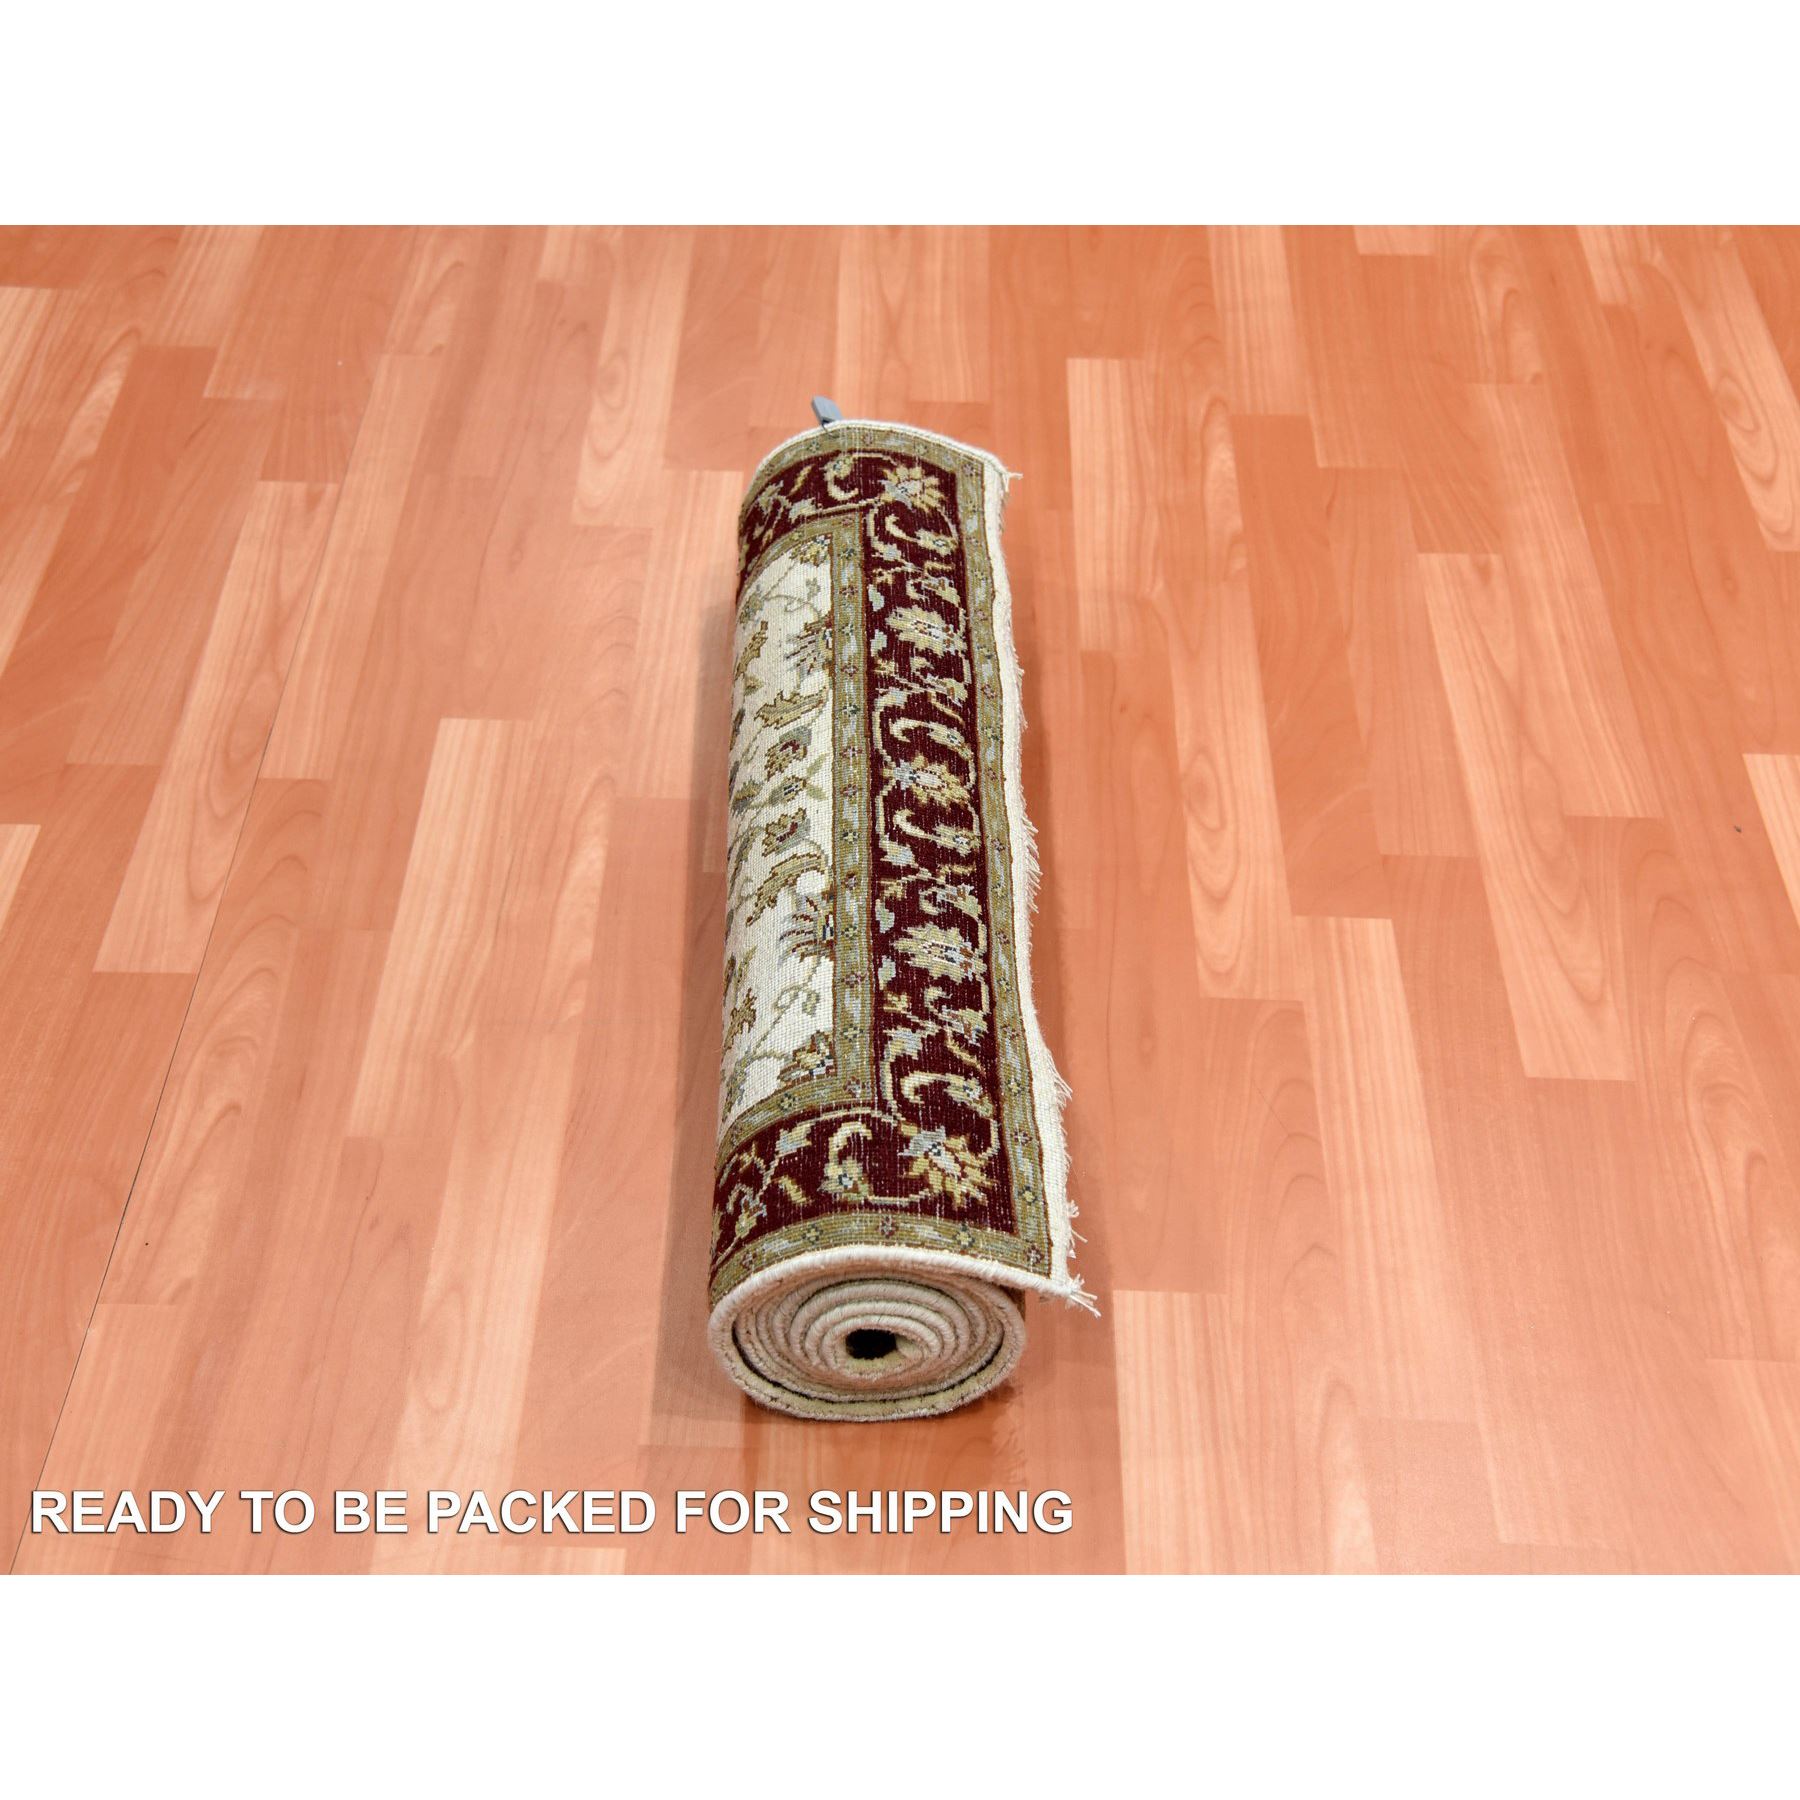 Rajasthan-Hand-Knotted-Rug-376375